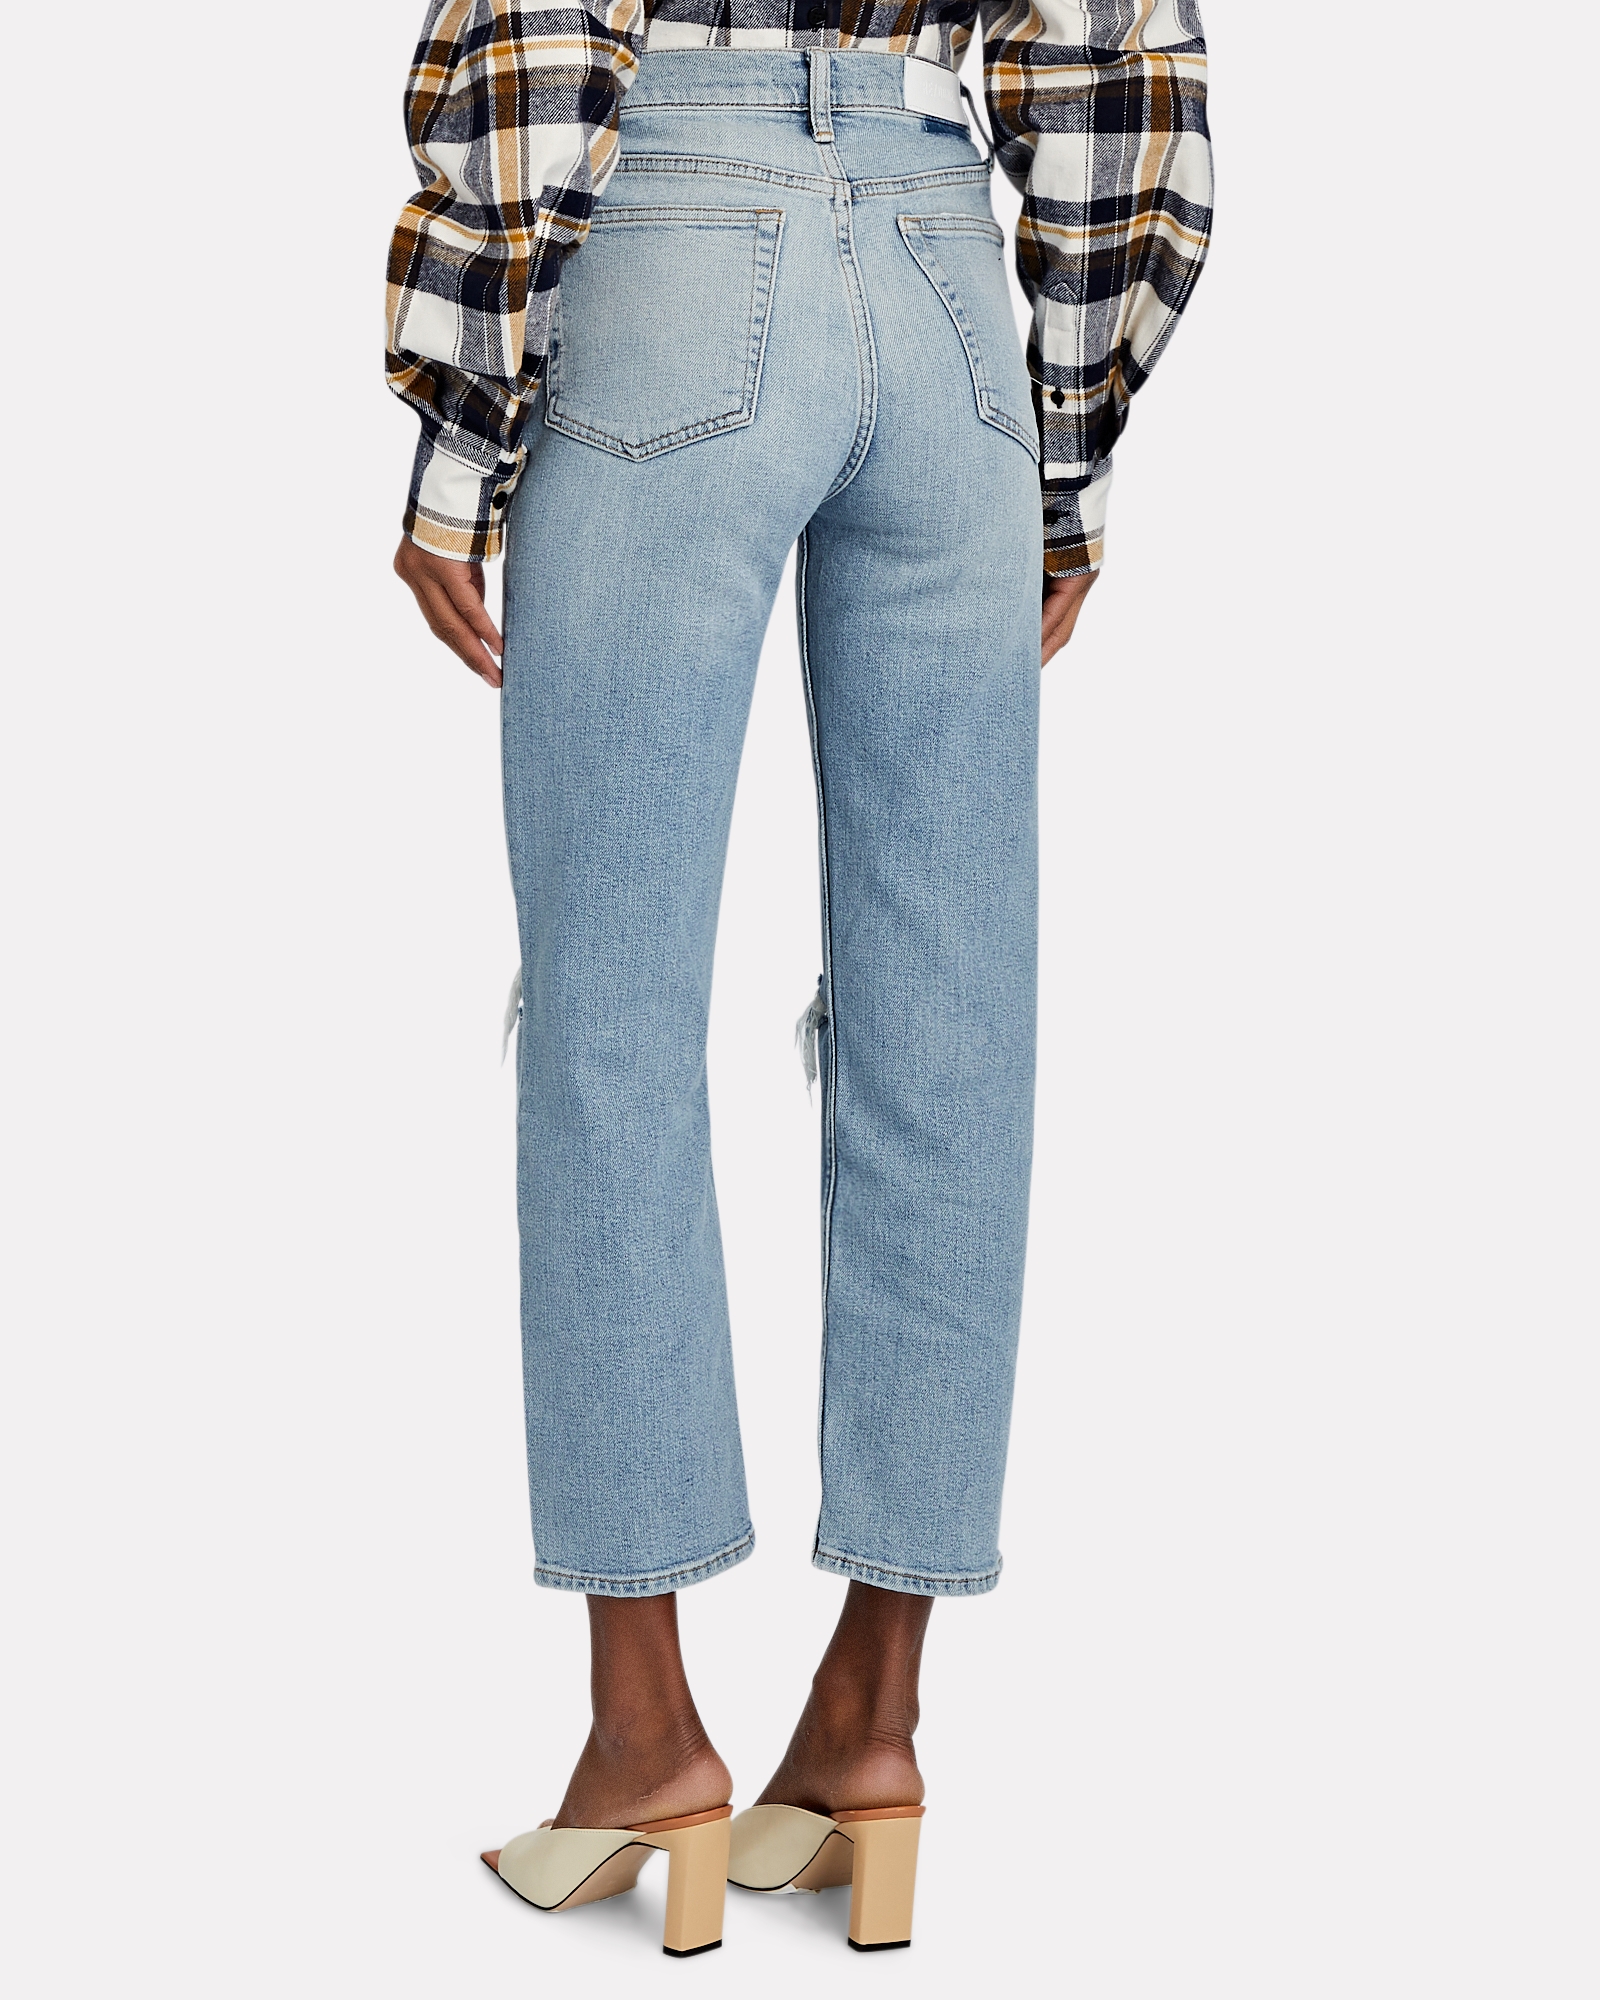 RE/DONE 70s High-Rise Stove Pipe Jeans | INTERMIX®